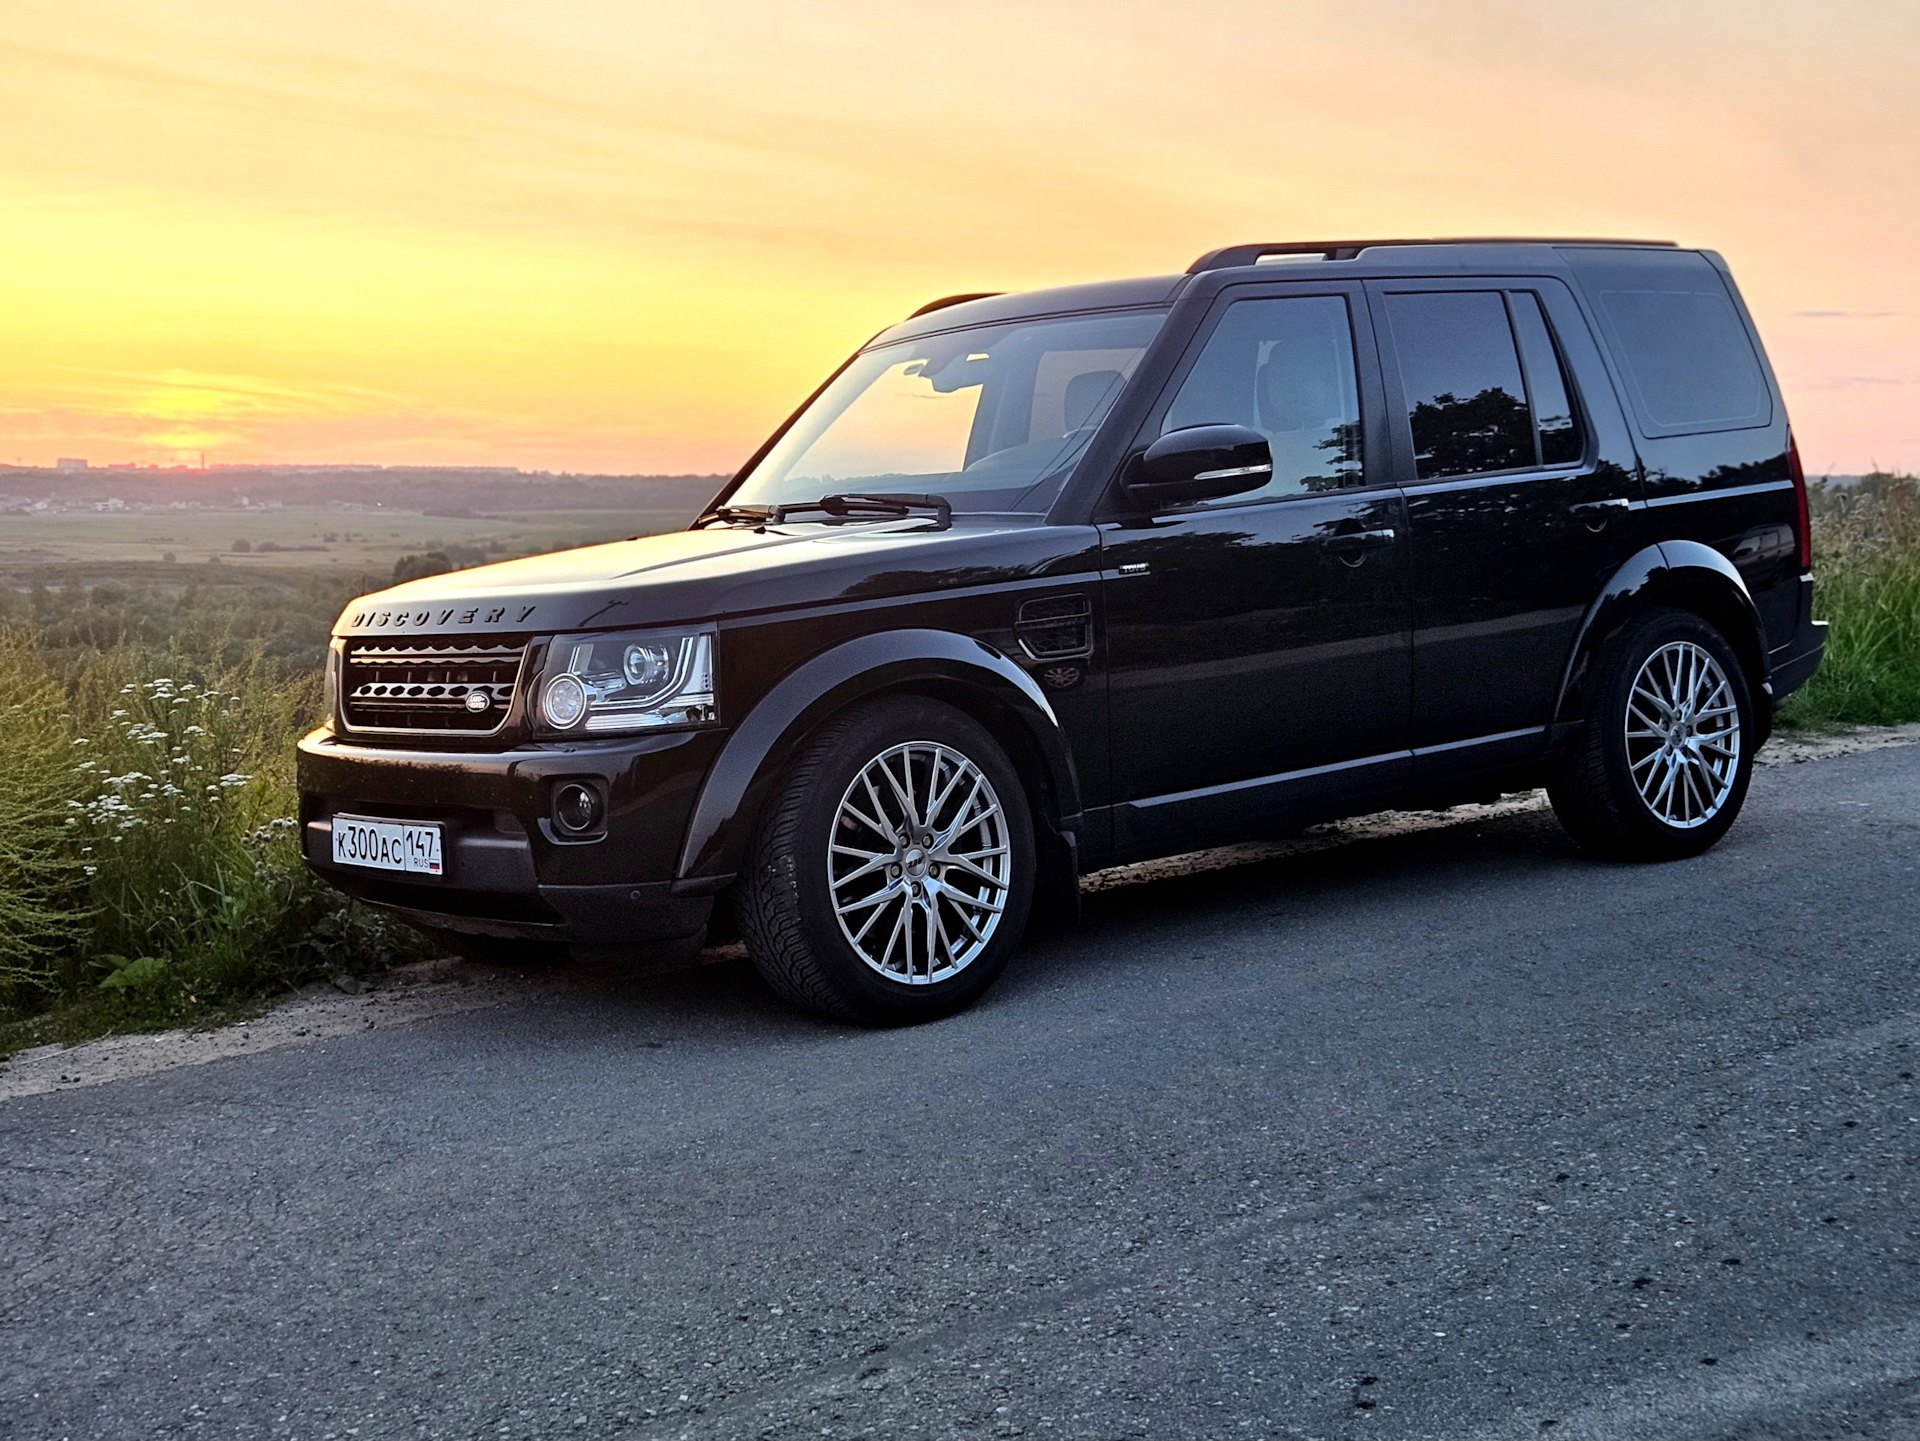 Дверь дискавери 4. Ленд Ровер Дискавери 4 2014. Land Rover Discovery 4. Ленд Ровер Дискавери 4 белый. Land Rover Discovery 4 2016 Black.